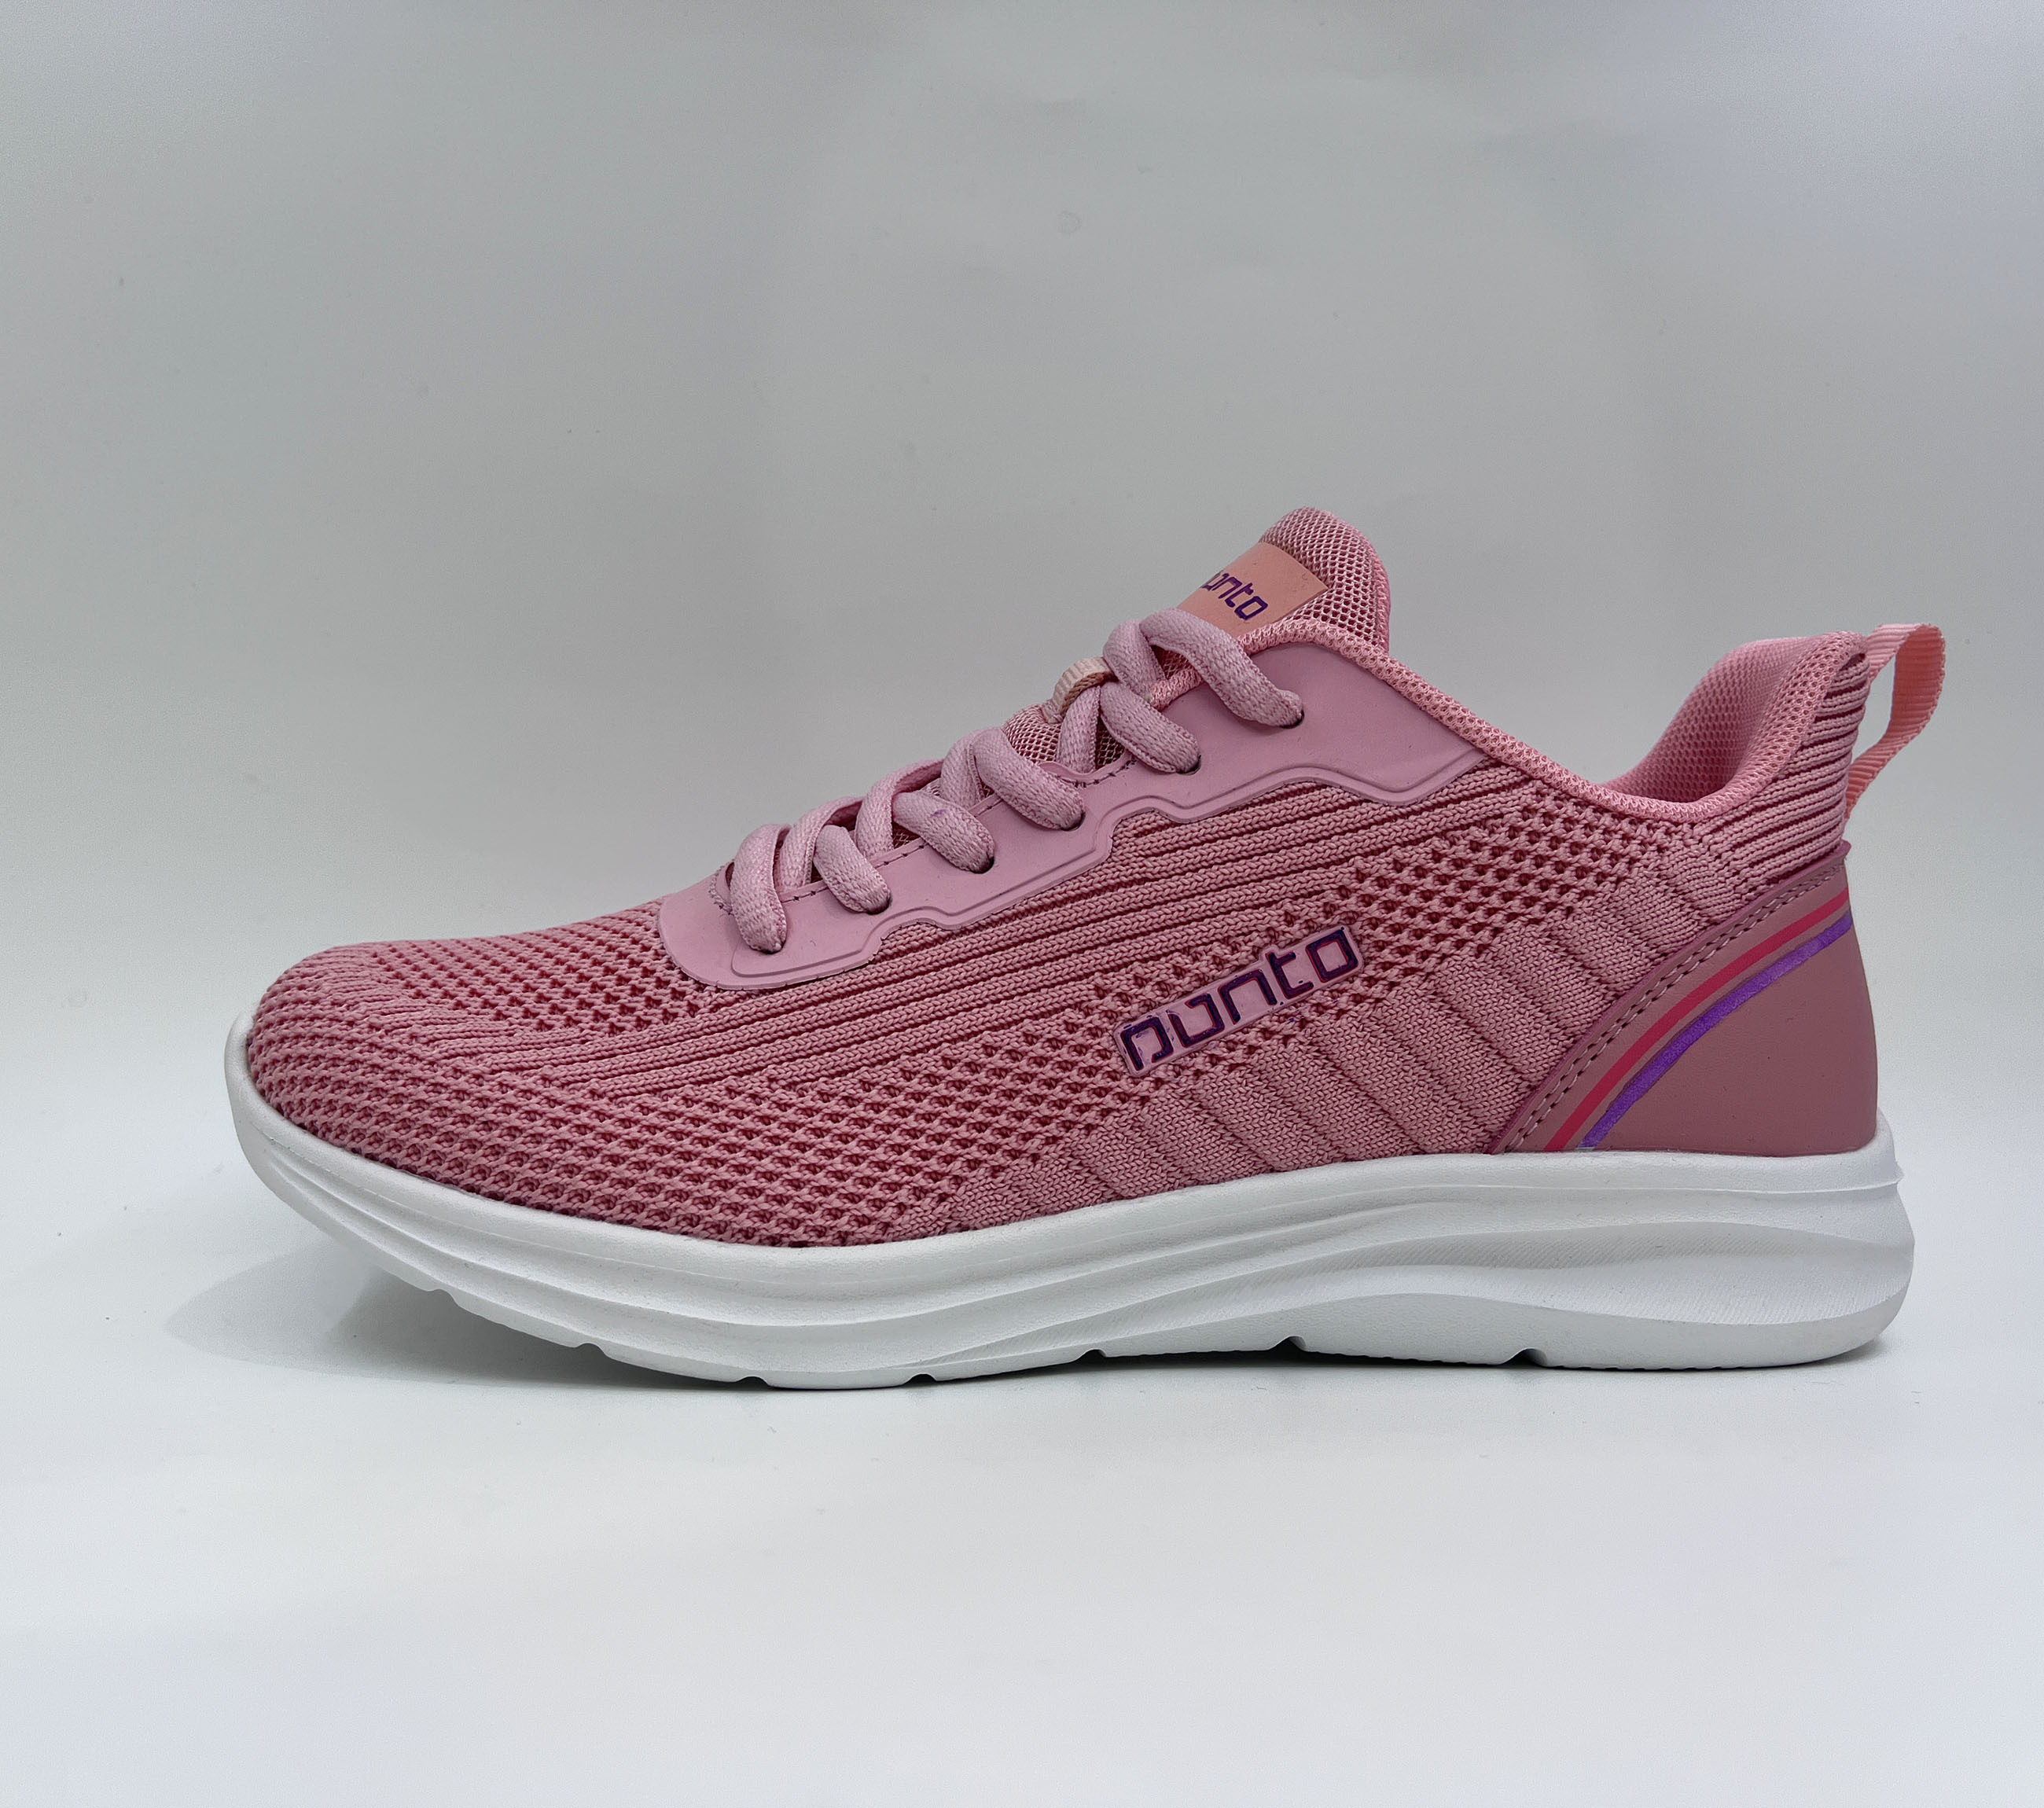 B20141 Sports shoes running women's summer mesh breathable running shoes